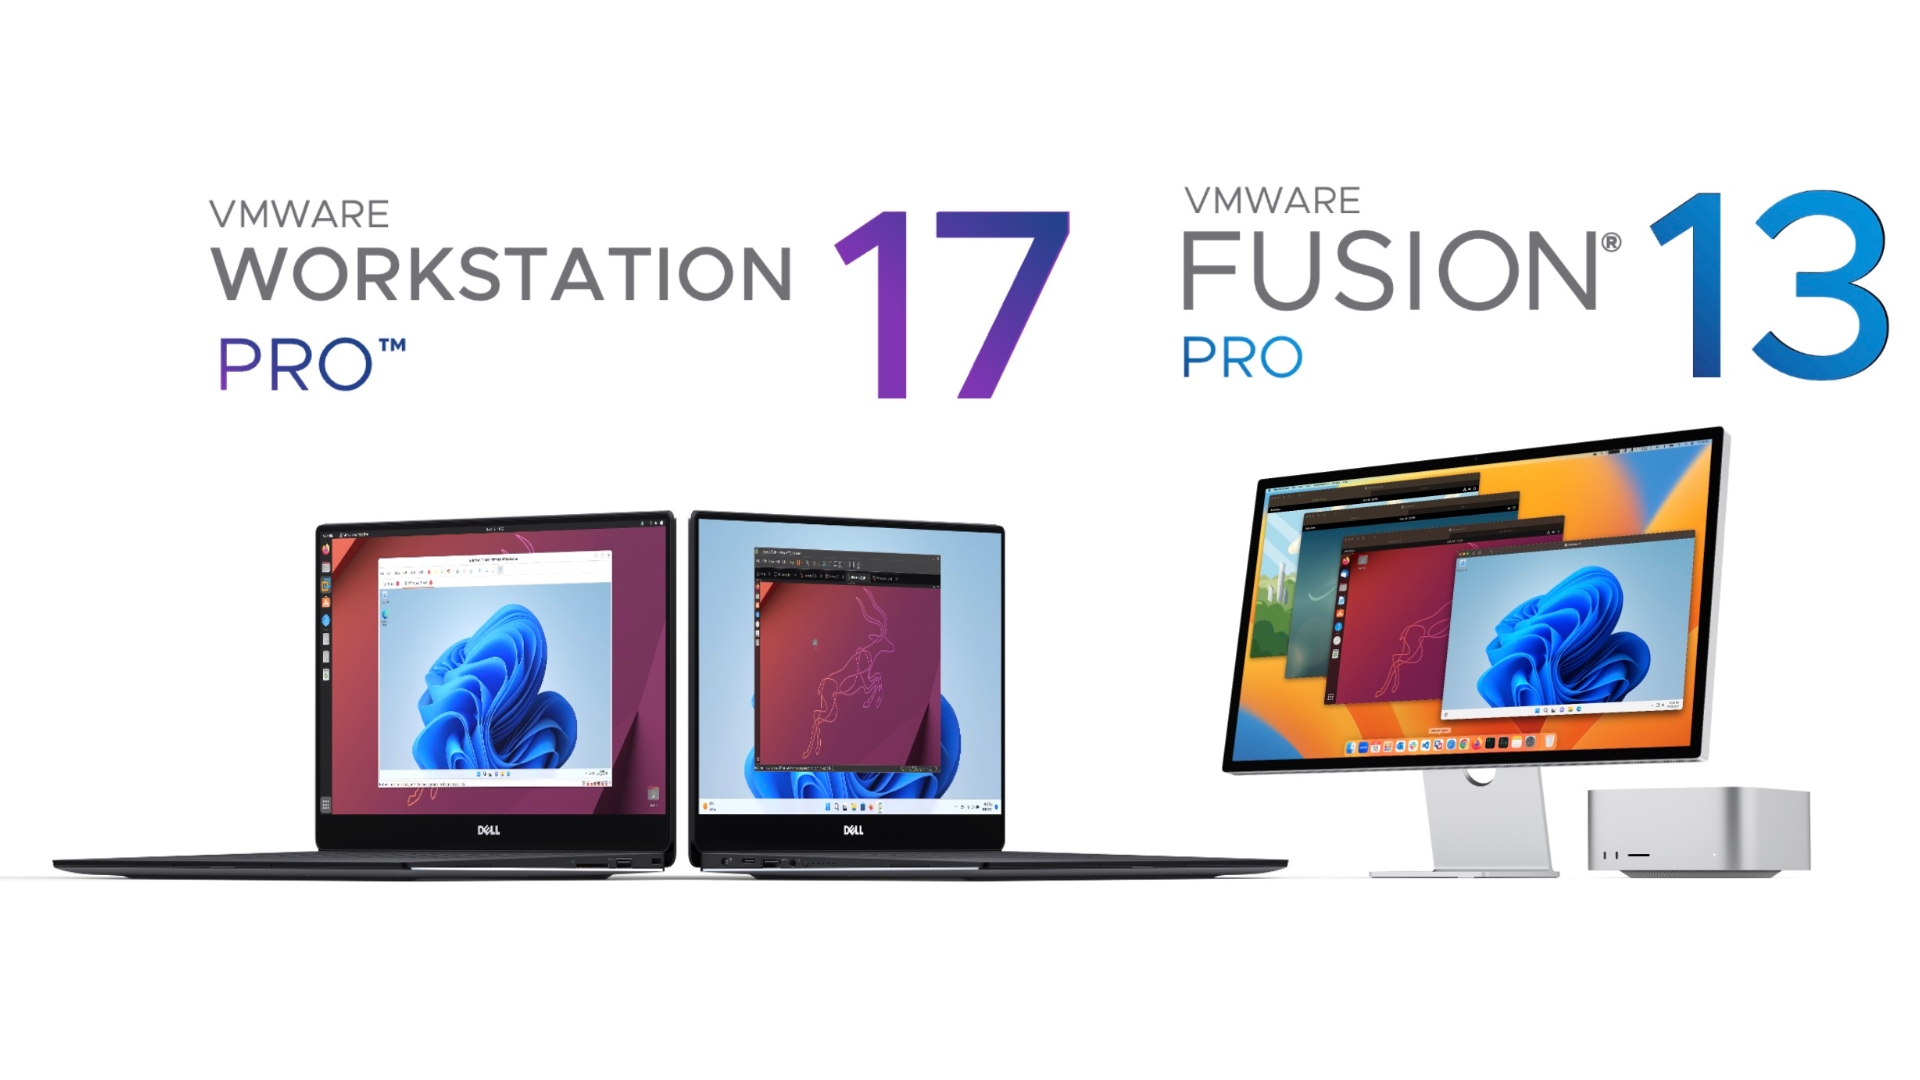 VMware Fusion Pro 13 Now Freely Available for Personal Use